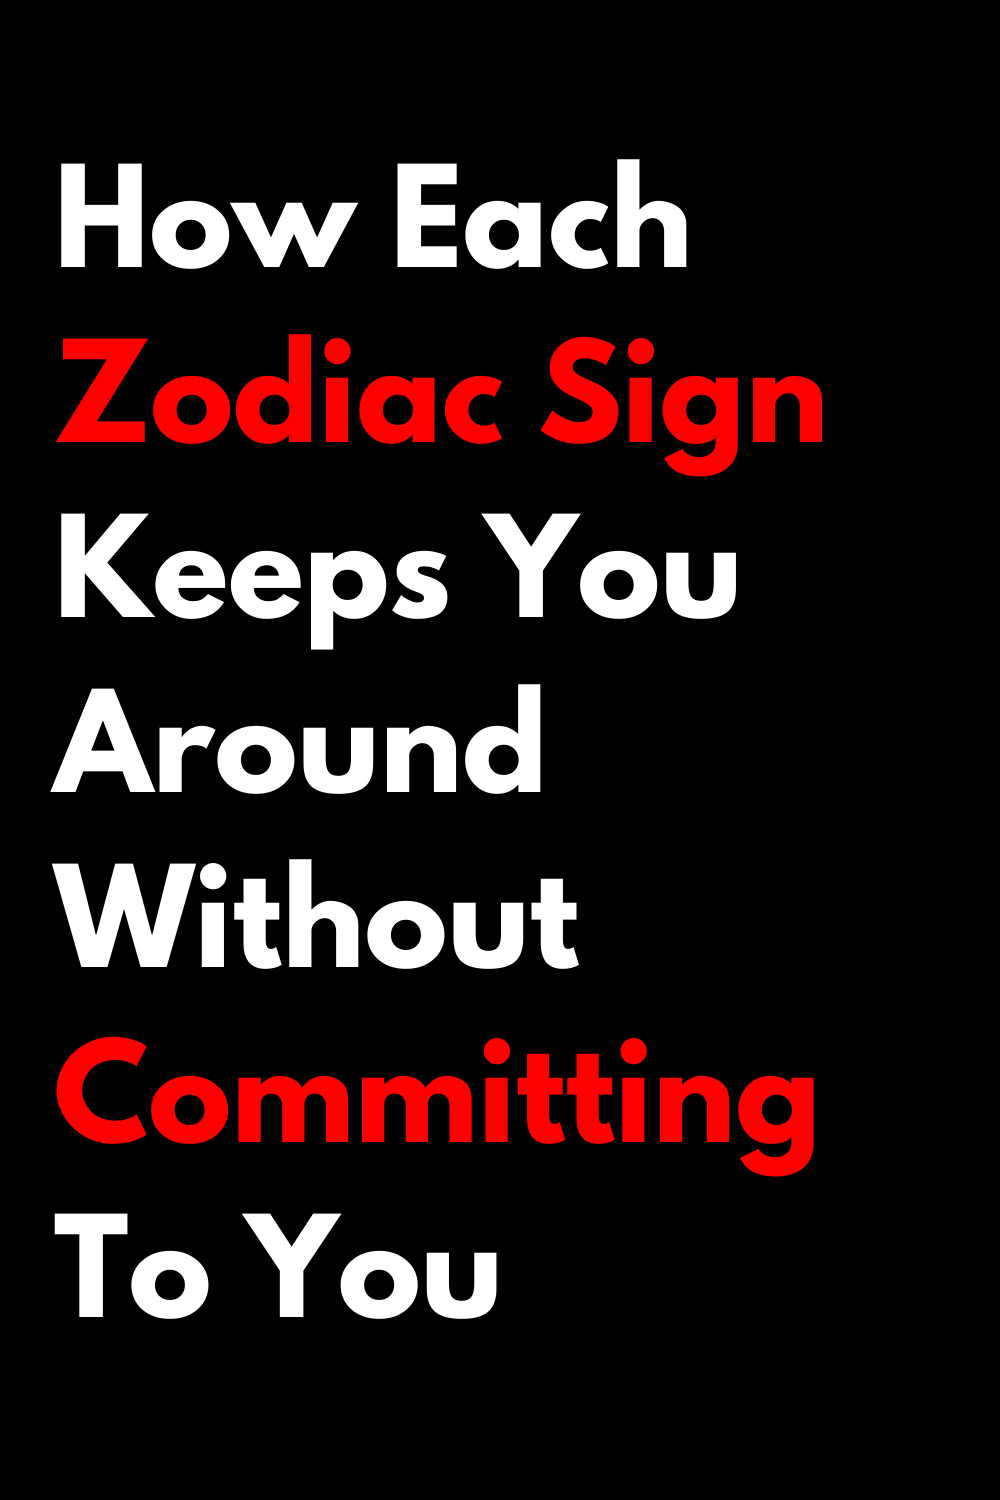 How Each Zodiac Sign Keeps You Around Without Committing To You